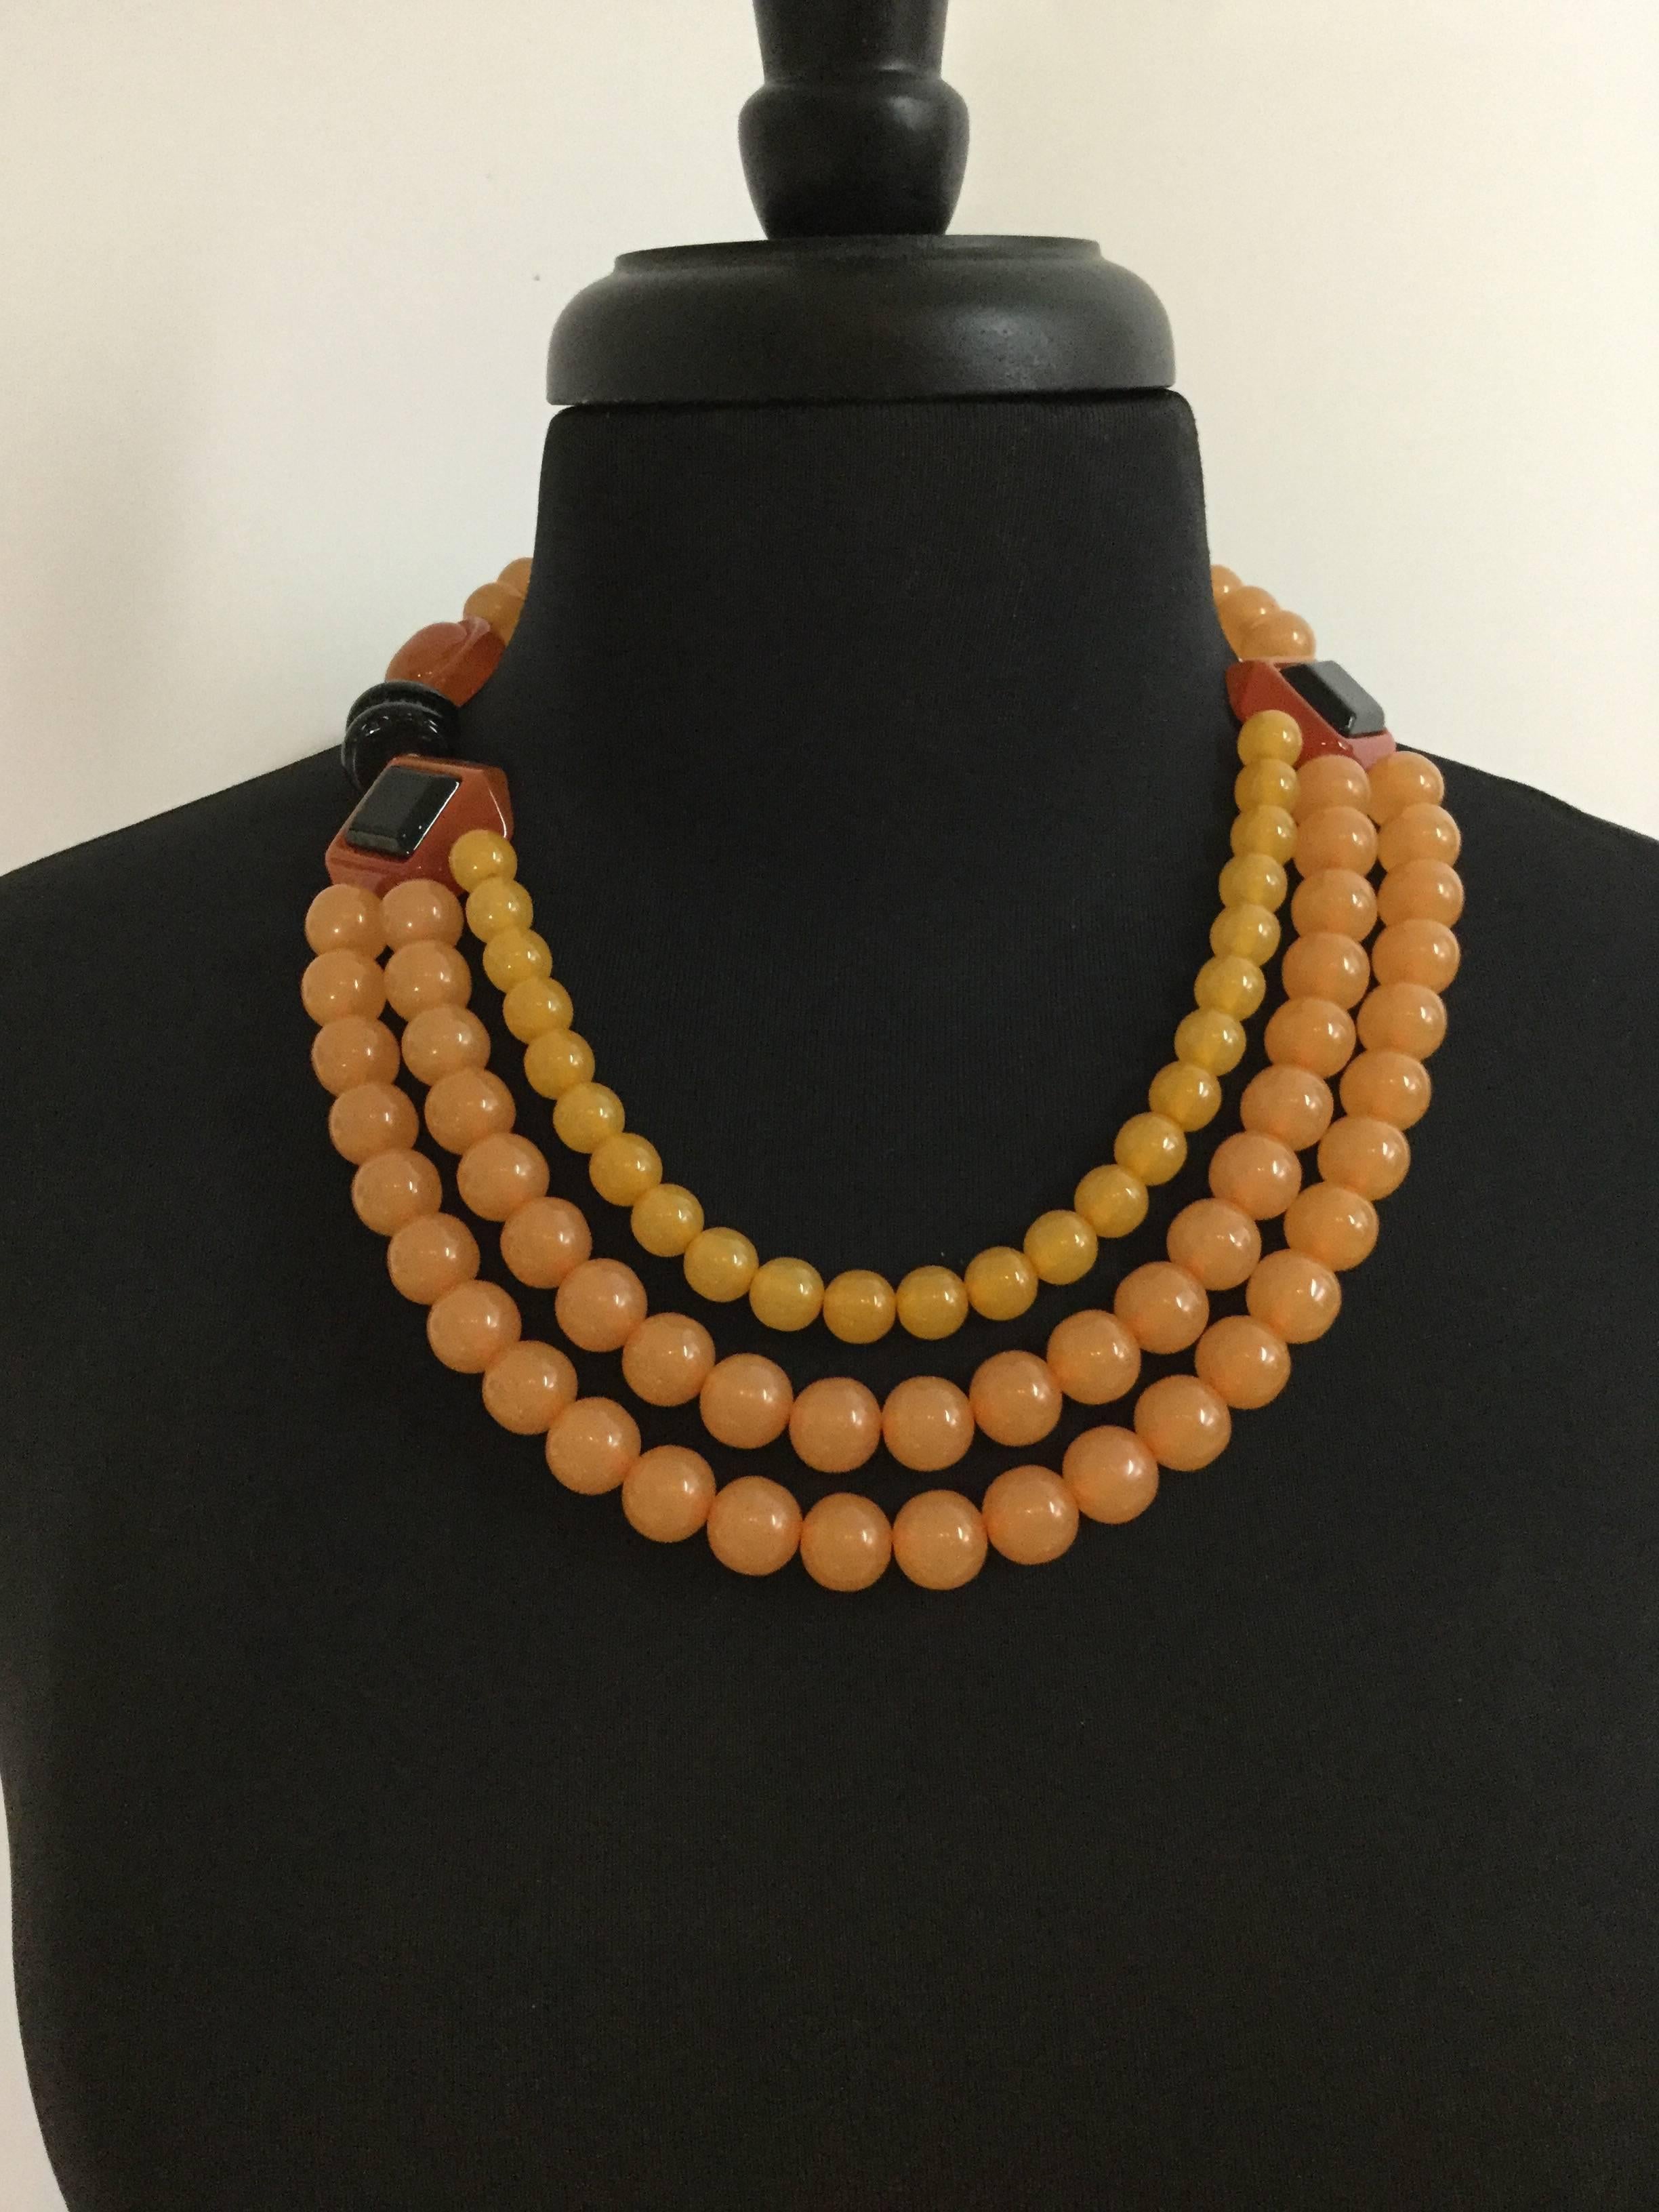 Super bold and graphic Ugo Correani Lucite beaded necklace of chunky graduated amber colored beads accented with large Deco style elements fashioned to resemble 1930's bakelite. The lucite feels warm and smooth to touch. The design is just superb!